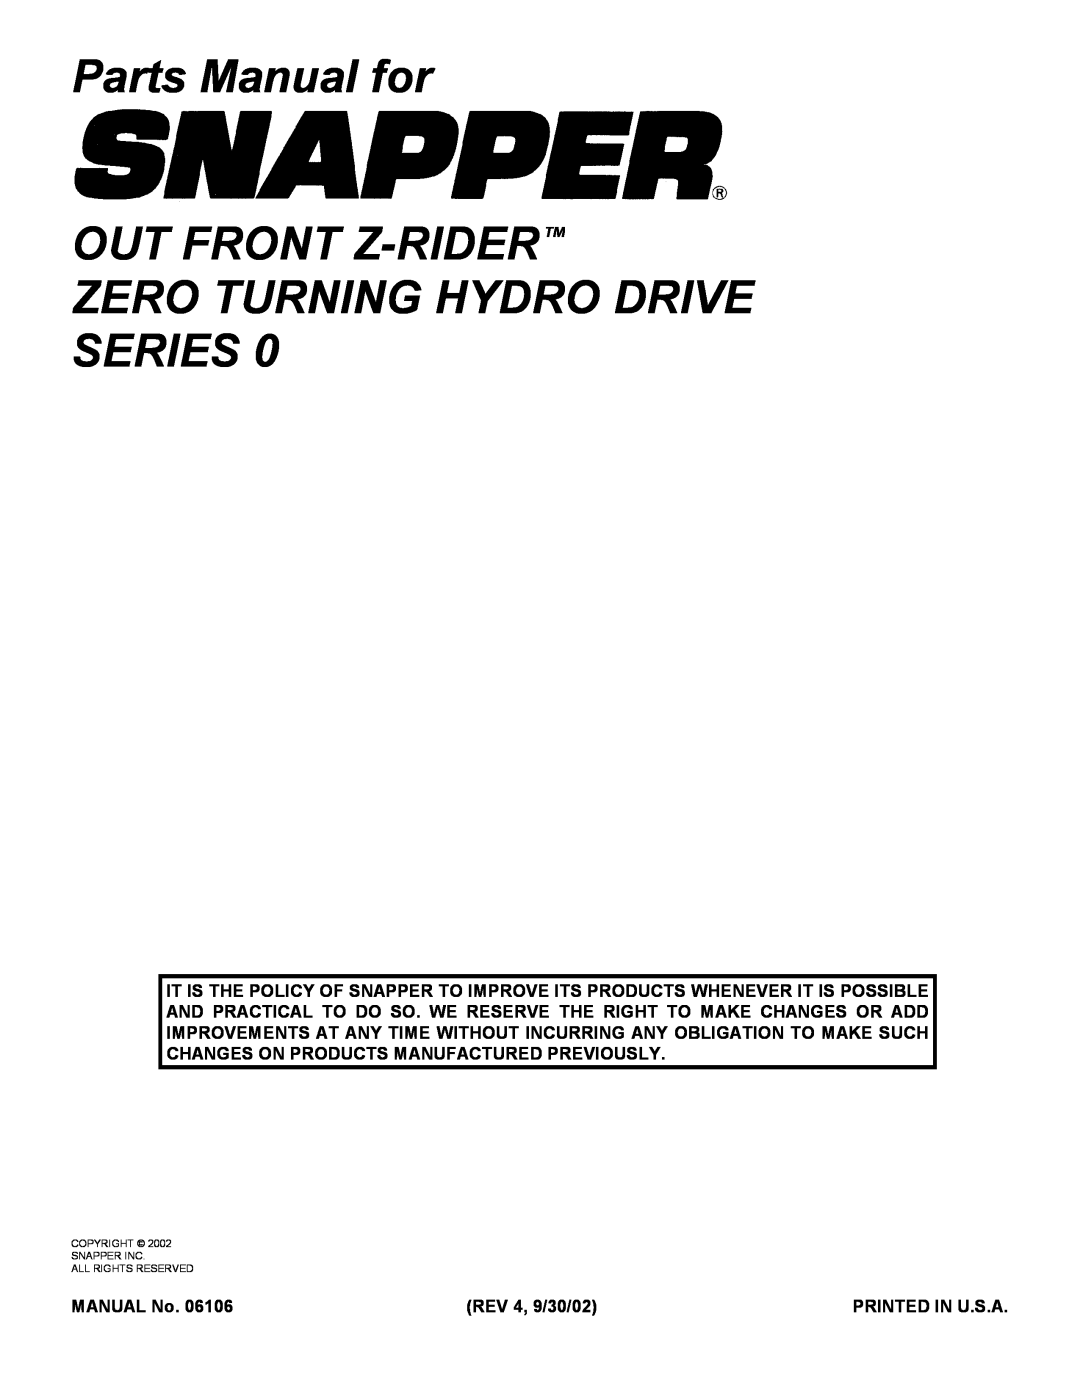 Snapper ZF2500KH, ZF2200K manual Parts Manual for OUT FRONT Z-RIDERTM, Zero Turning Hydro Drive Series, MANUAL No 